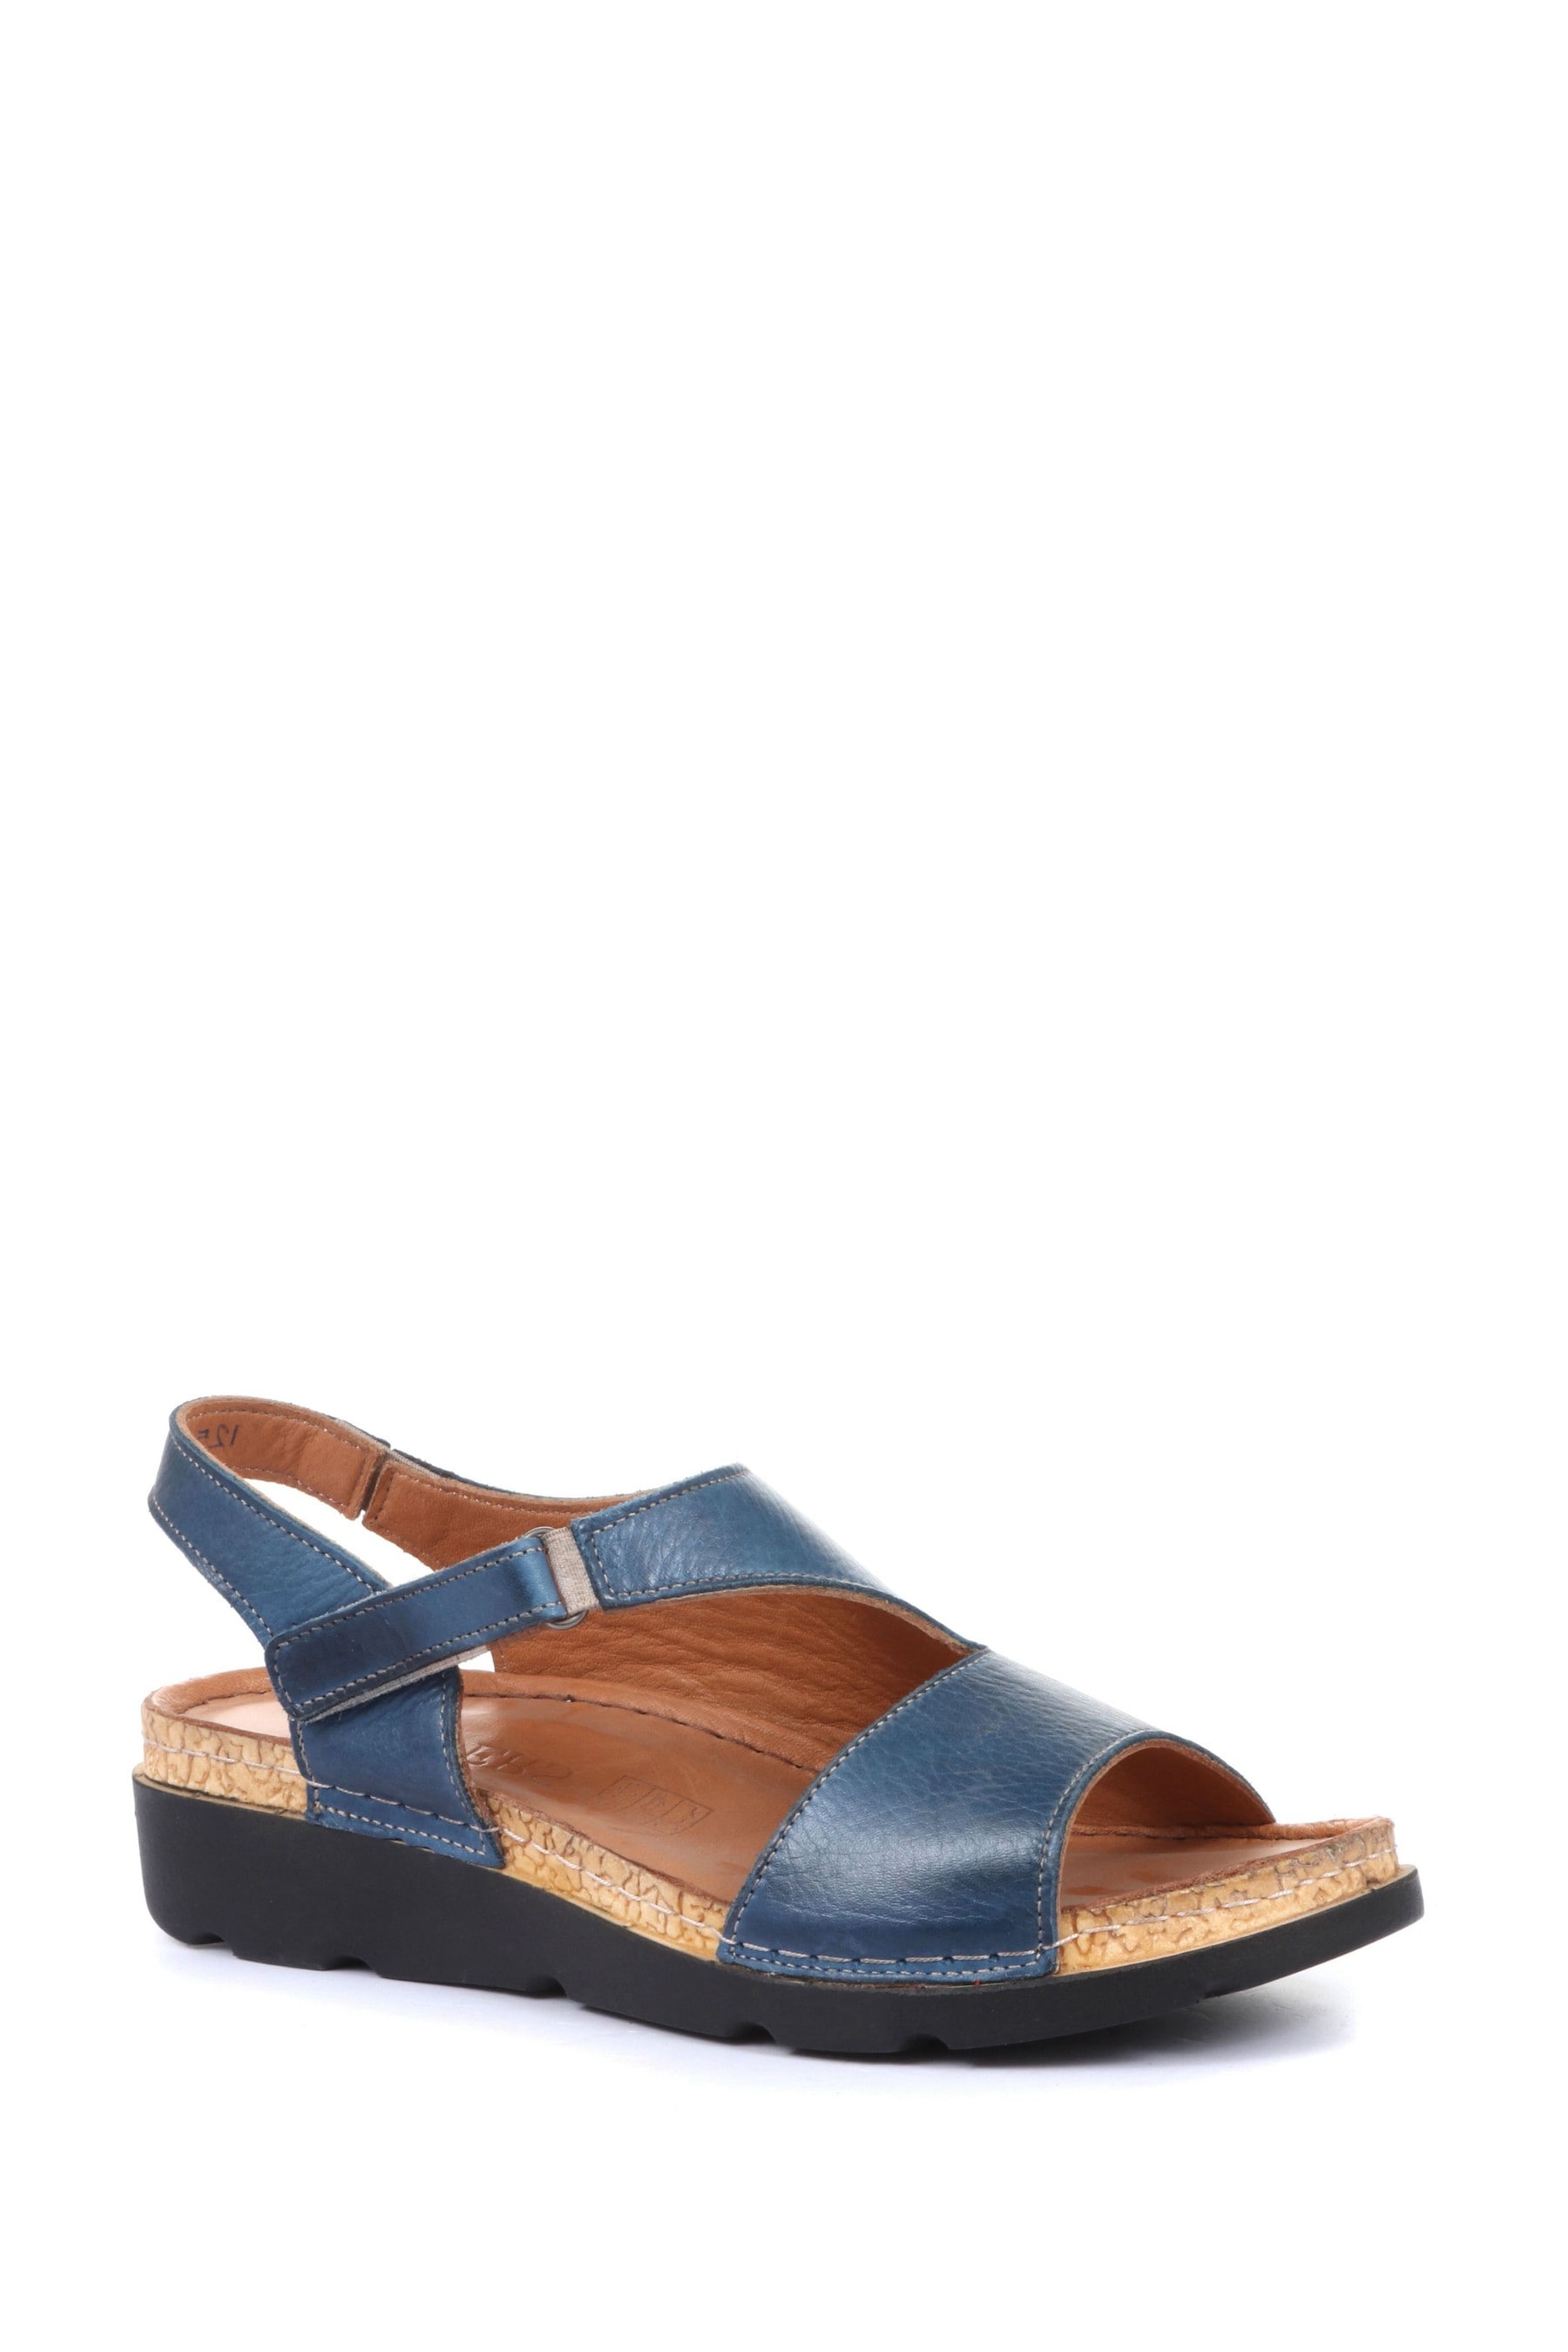 Buy Pavers Blue Ladies Casual Leather Slingback Sandals from Next Ireland